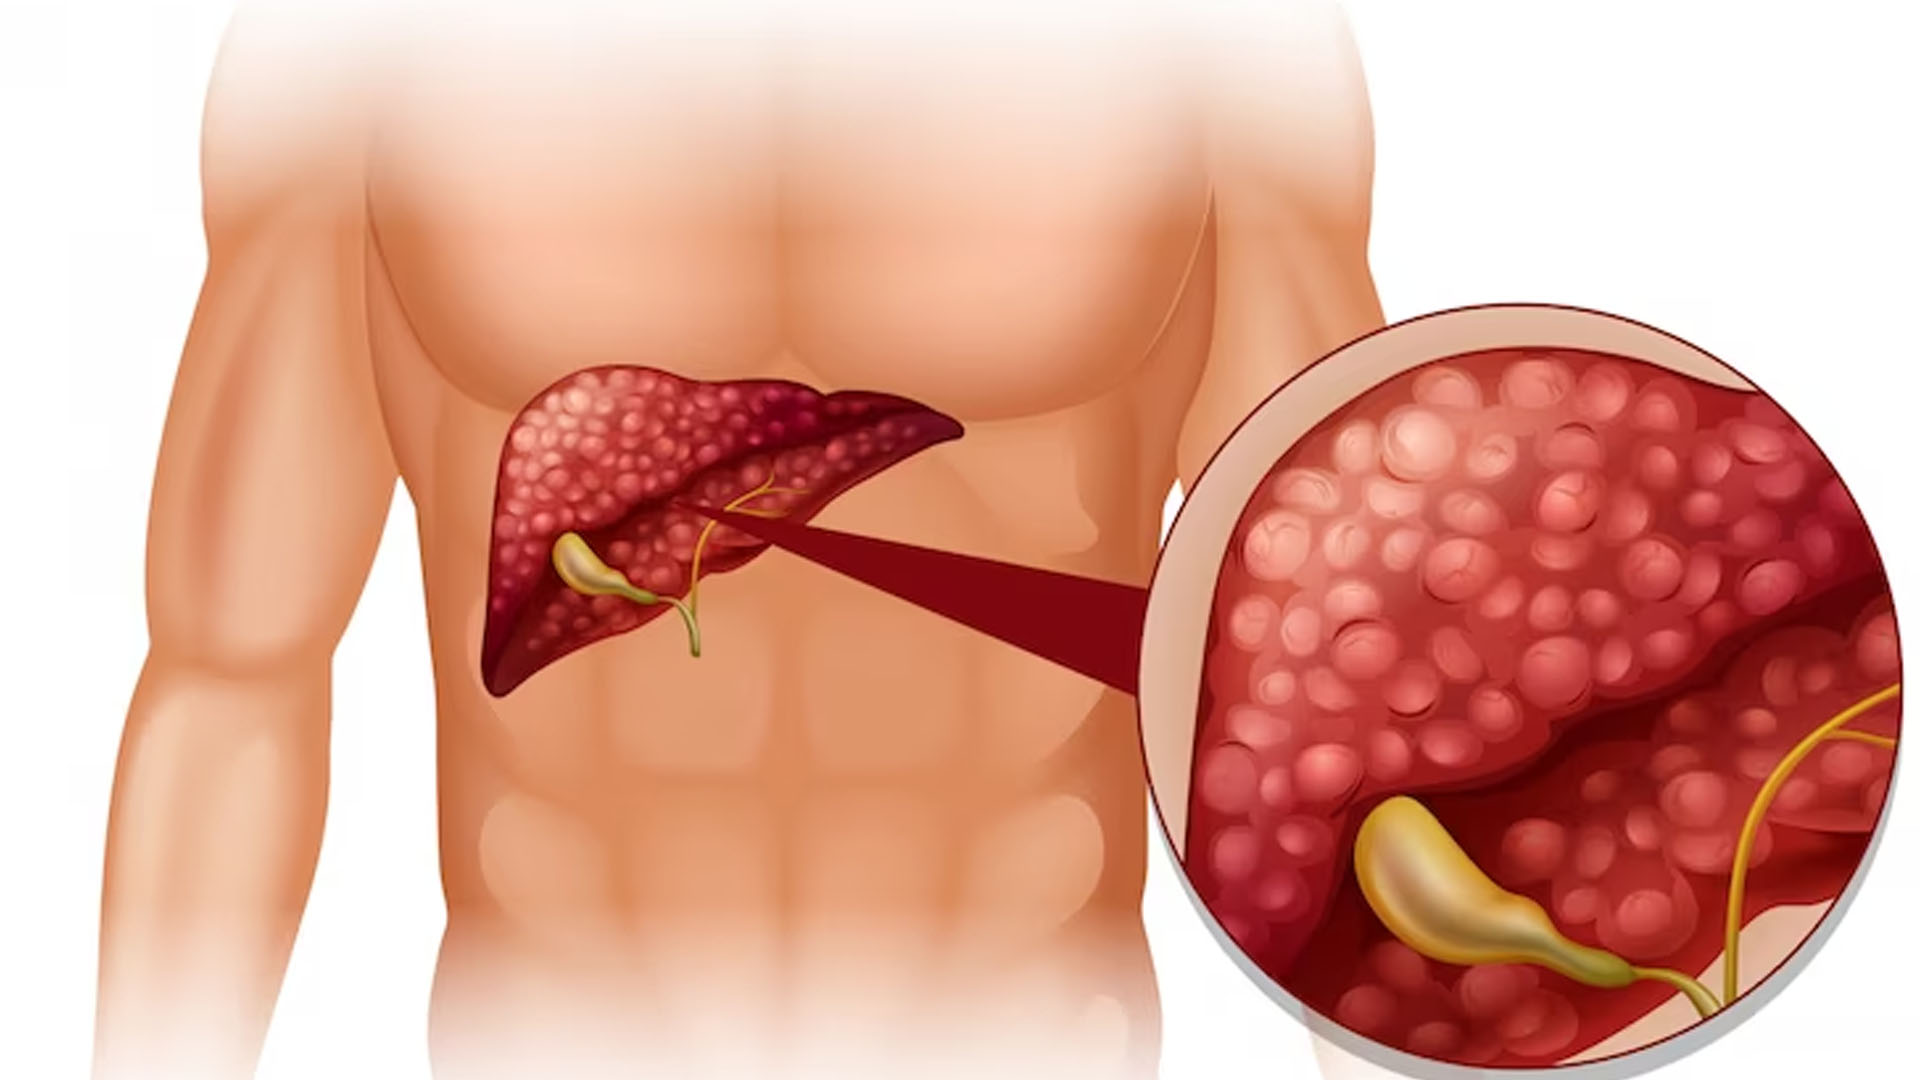 What are the Symptoms of Pancreatic Cancer in Woman?